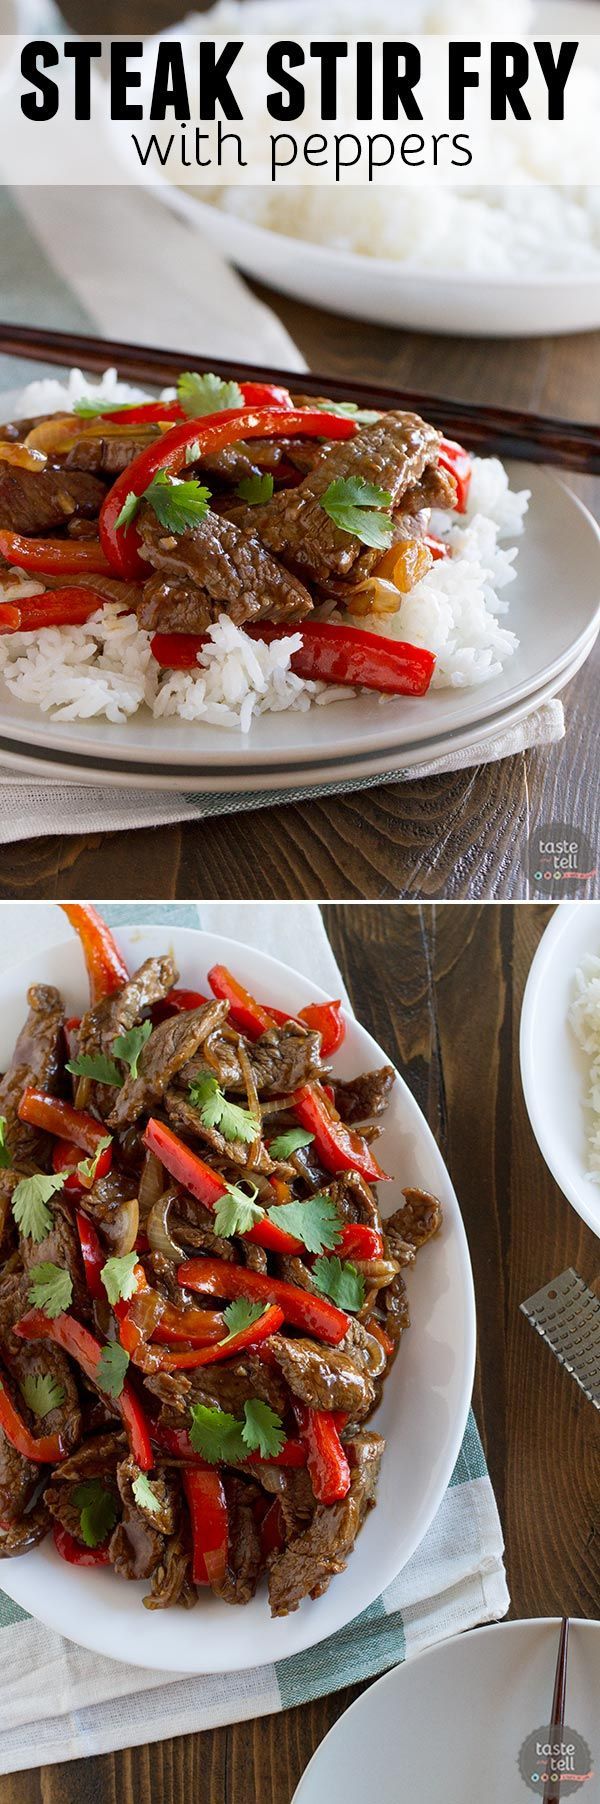 An easy steak stir fry recipe with onions and red peppers. Fresh orange zest makes this stir fry recipe pleasantly different.